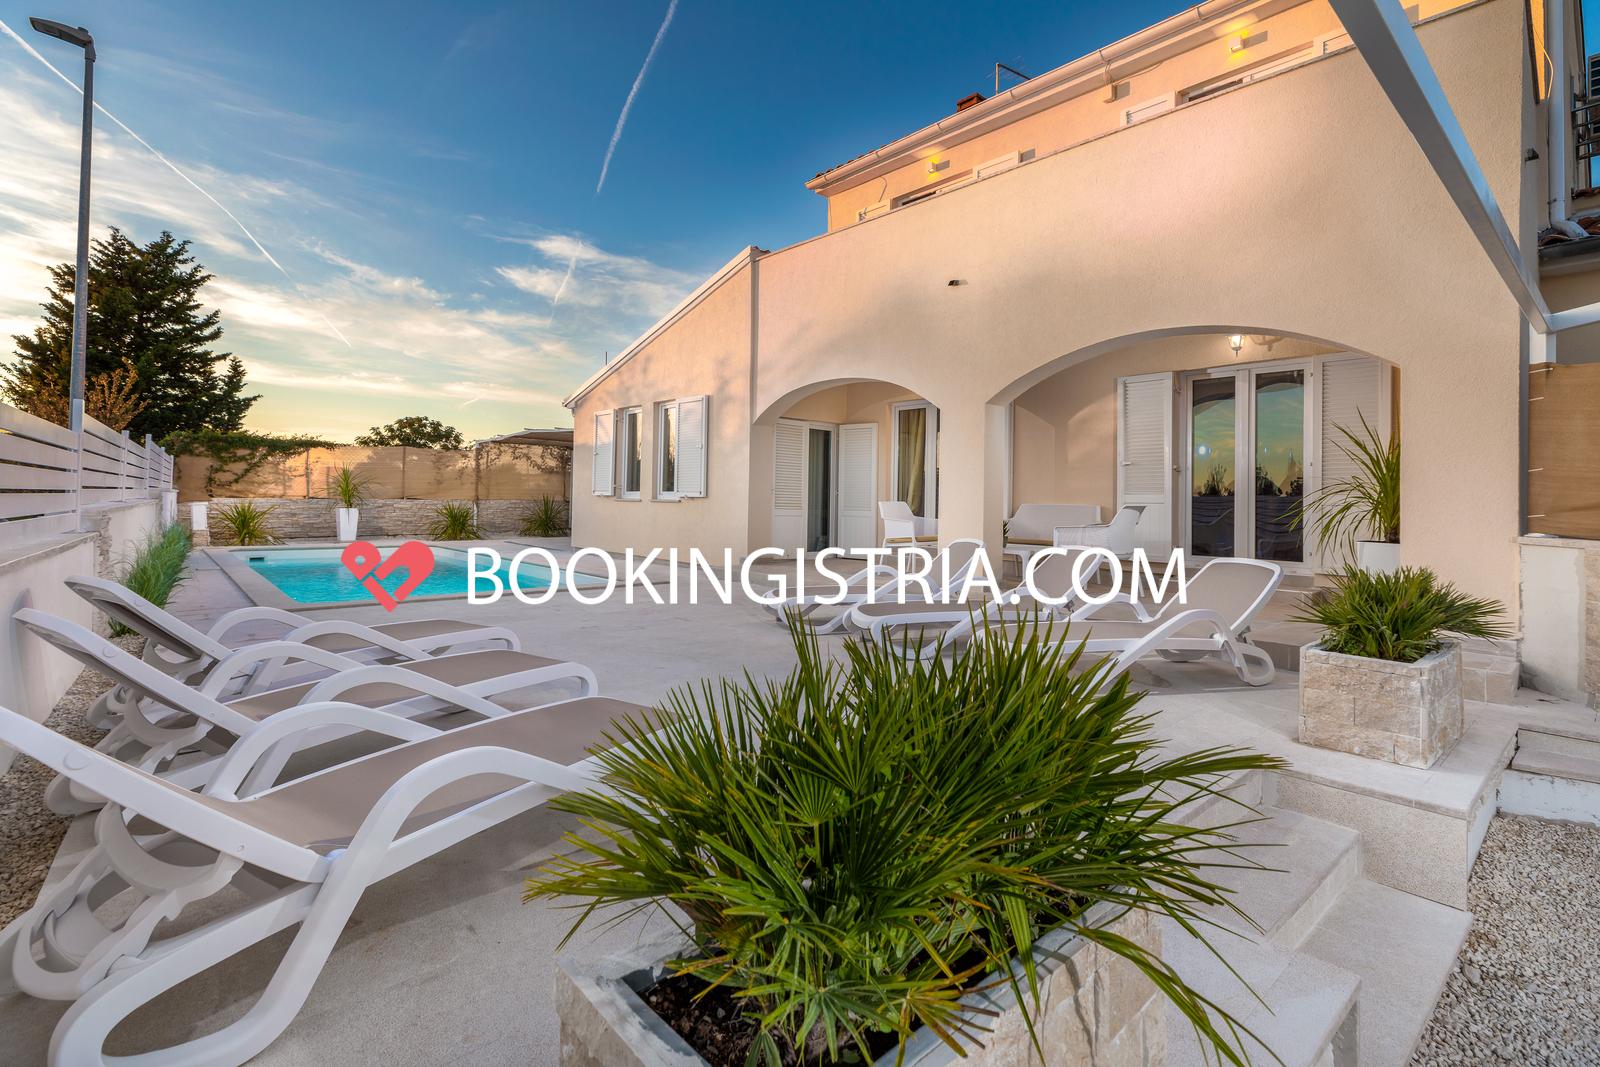 booking-istria